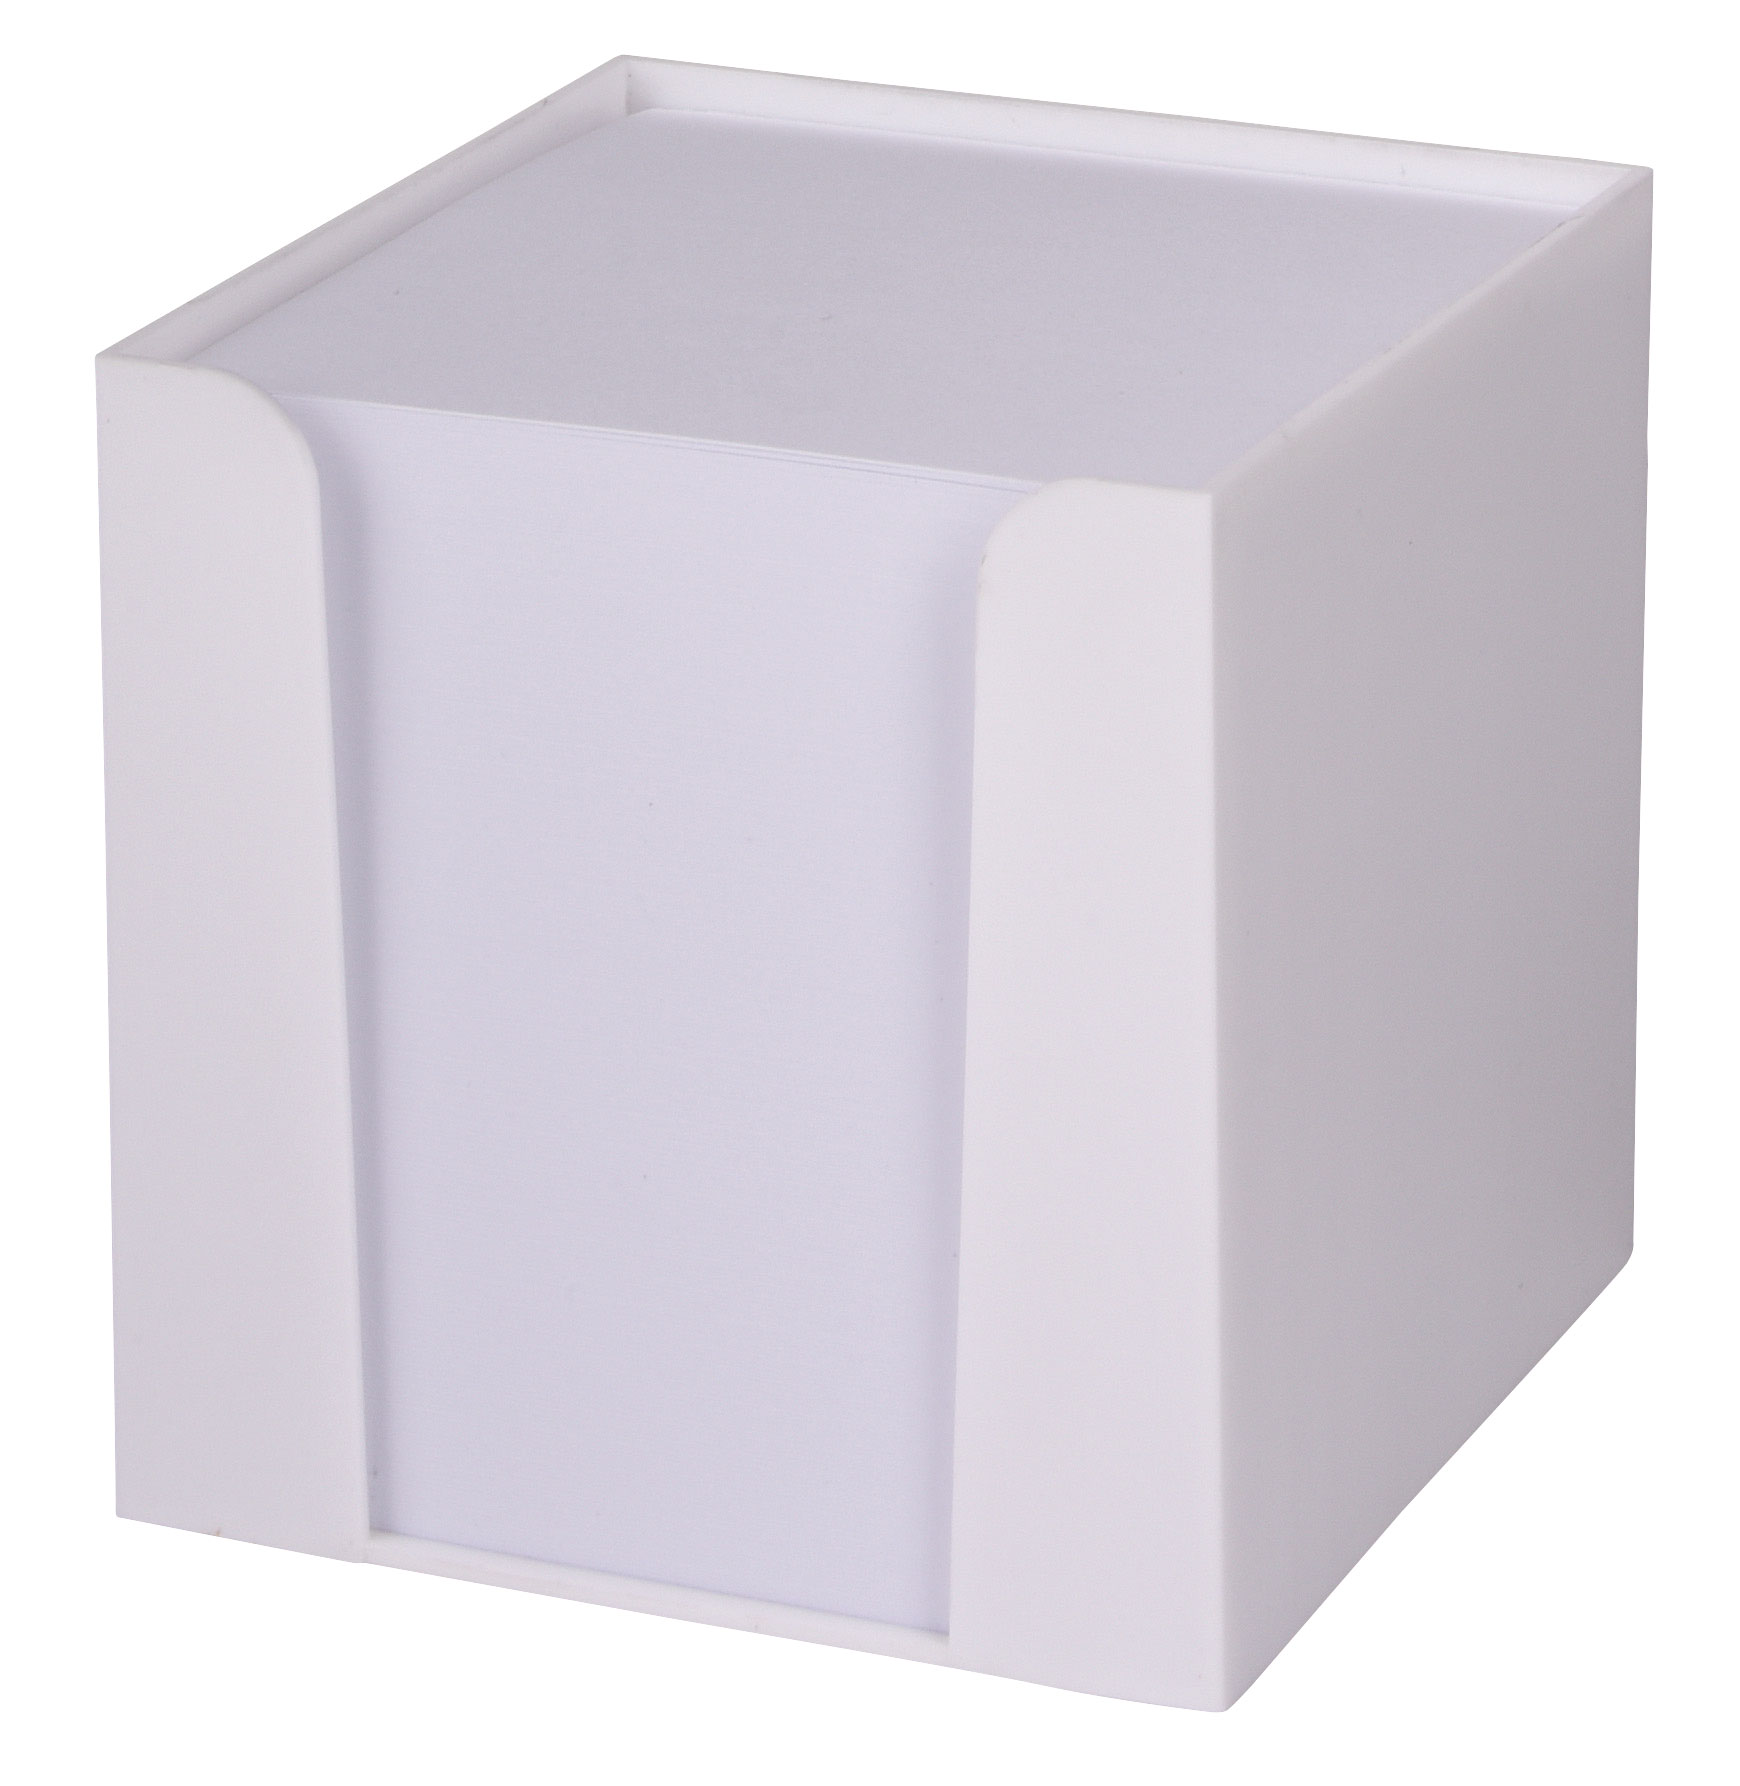 Memo cube NEVER FORGET - white